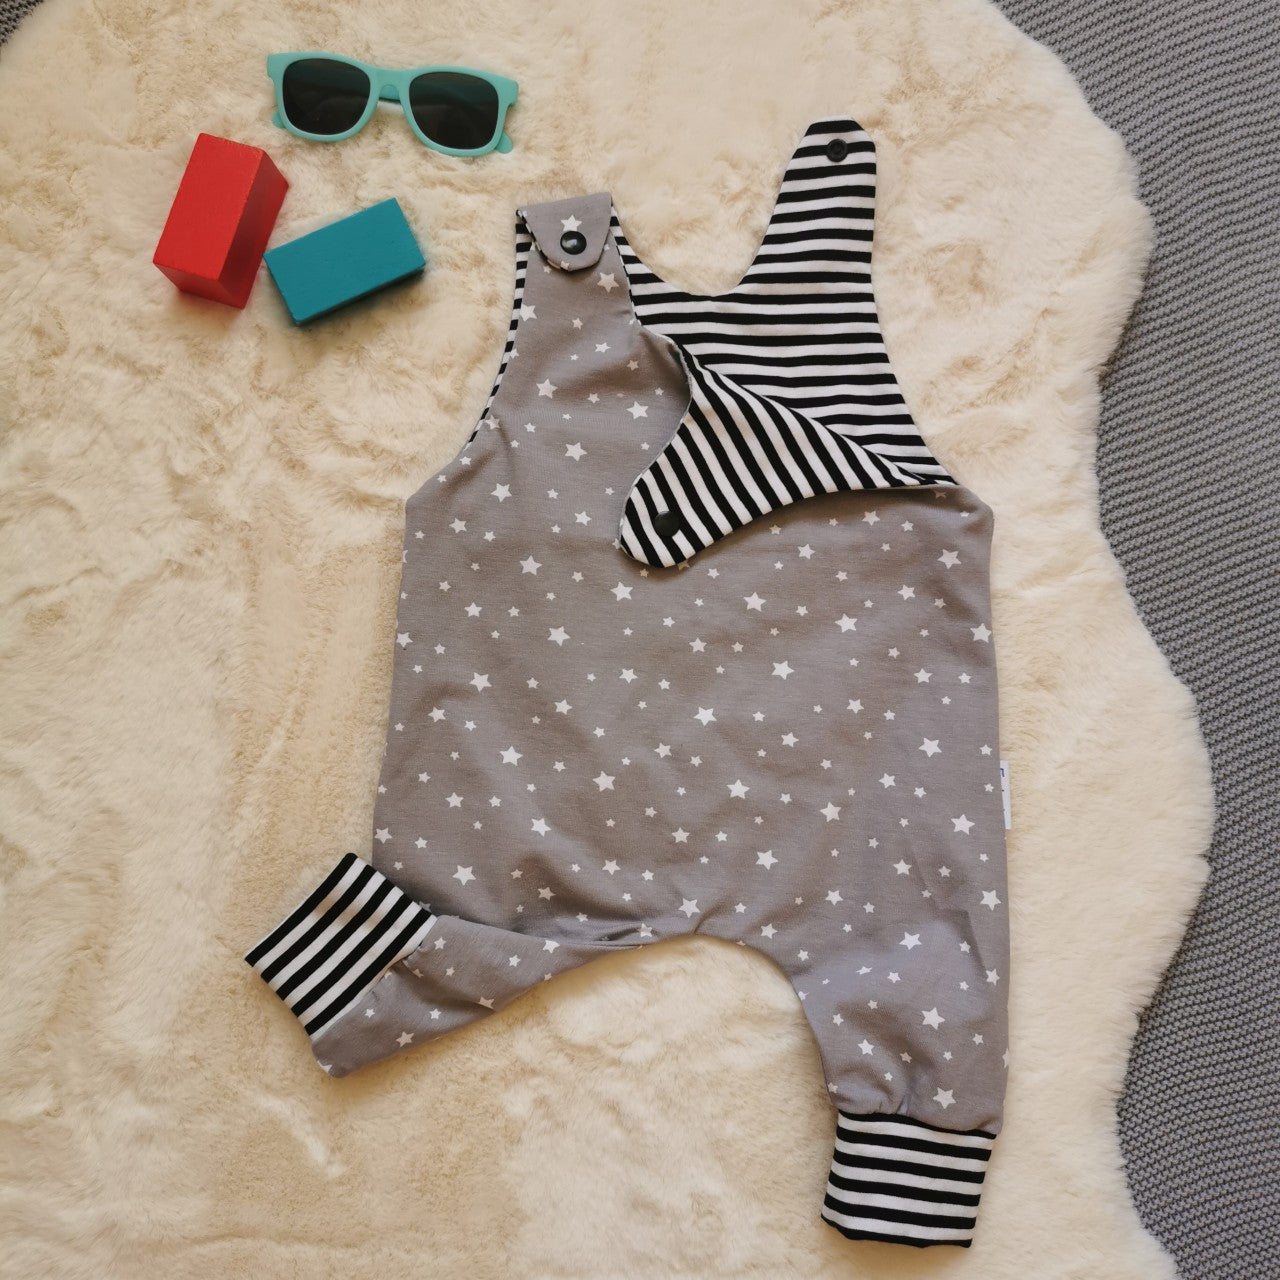 The dreamy grey stars sleeveless romper, soft and comfy with easy on shoulder popper entry. Handmade using grey stars and monochrome striped cotton jerseys'. Shown with one of the shoulder poppers open.